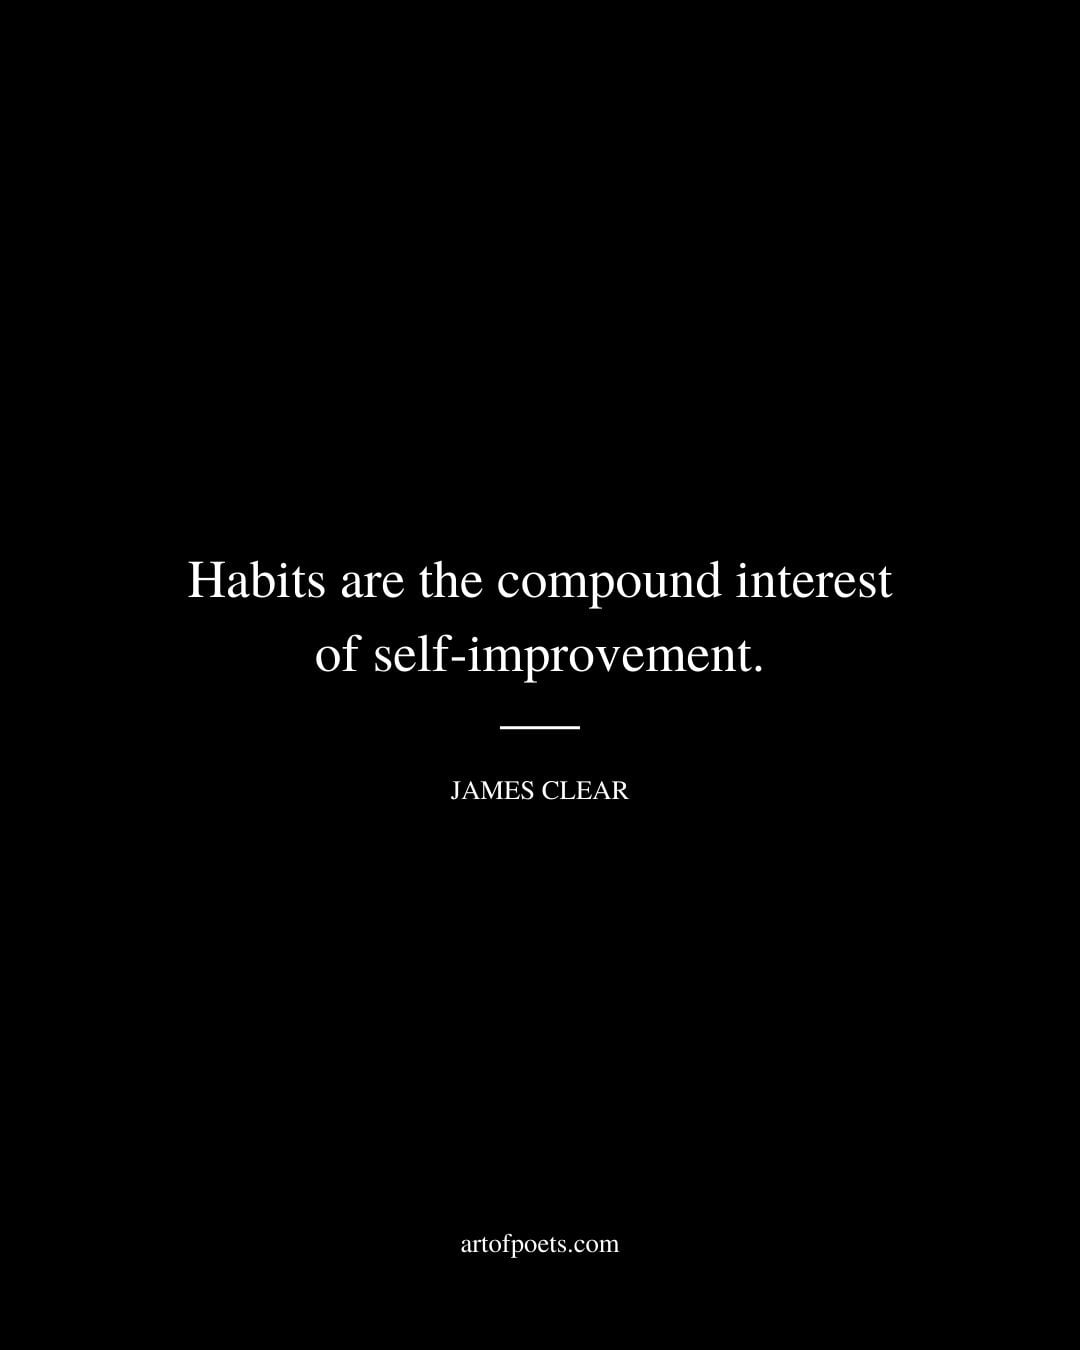 Habits are the compound interest of self improvement